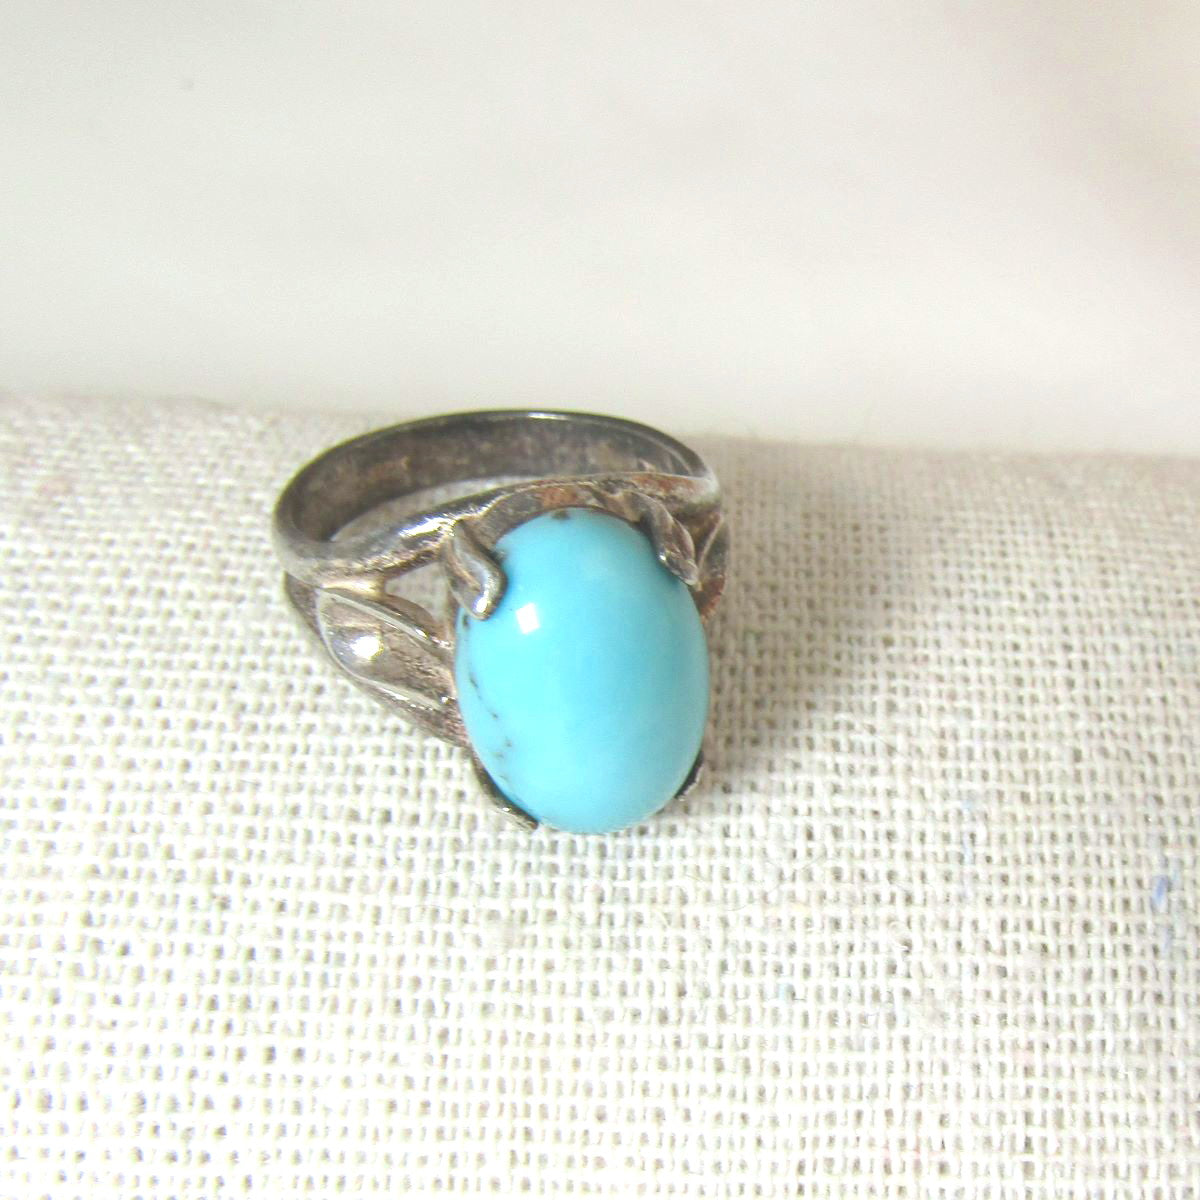 Affordable Turquoise Woman's Ring Size 7 VP's Jewelry